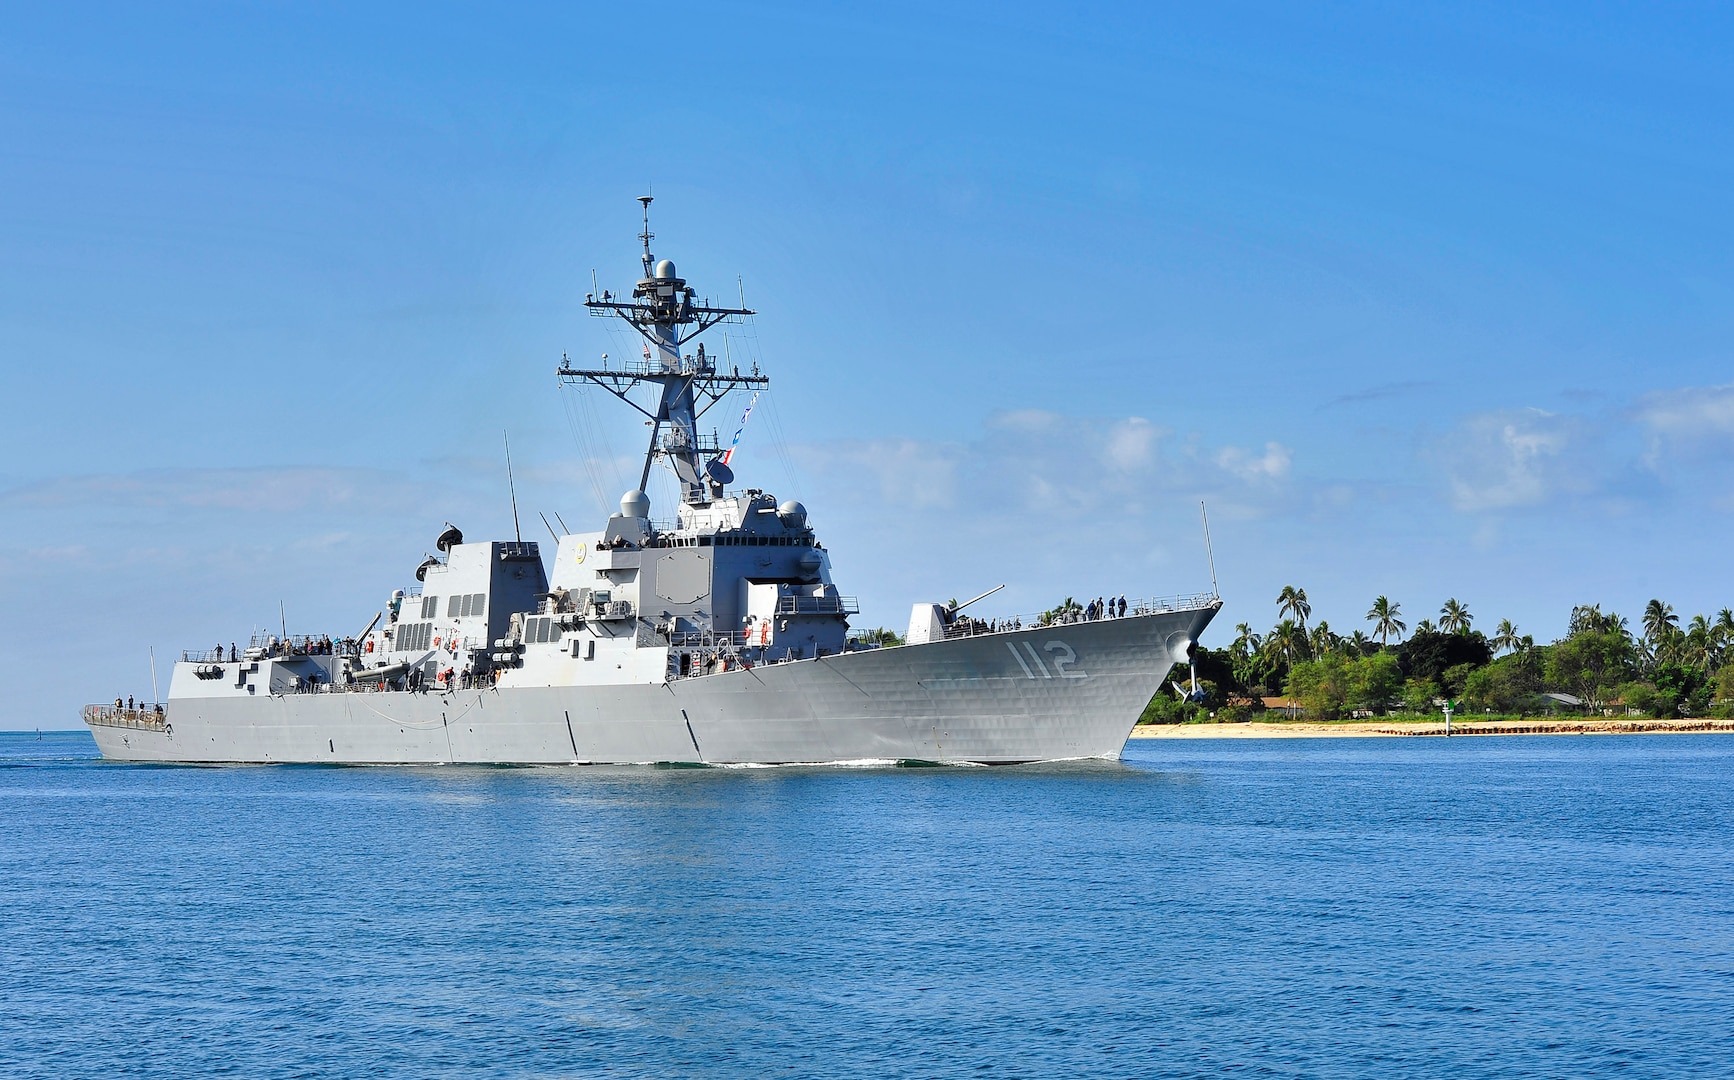 In this photo, the guided-missile destroyer USS Michael Murphy (DDG 112) is returning with 19 civilians embarked who were transferred from Protecteur, which experienced an engine fire and is under tow returning to Pearl Harbor.      